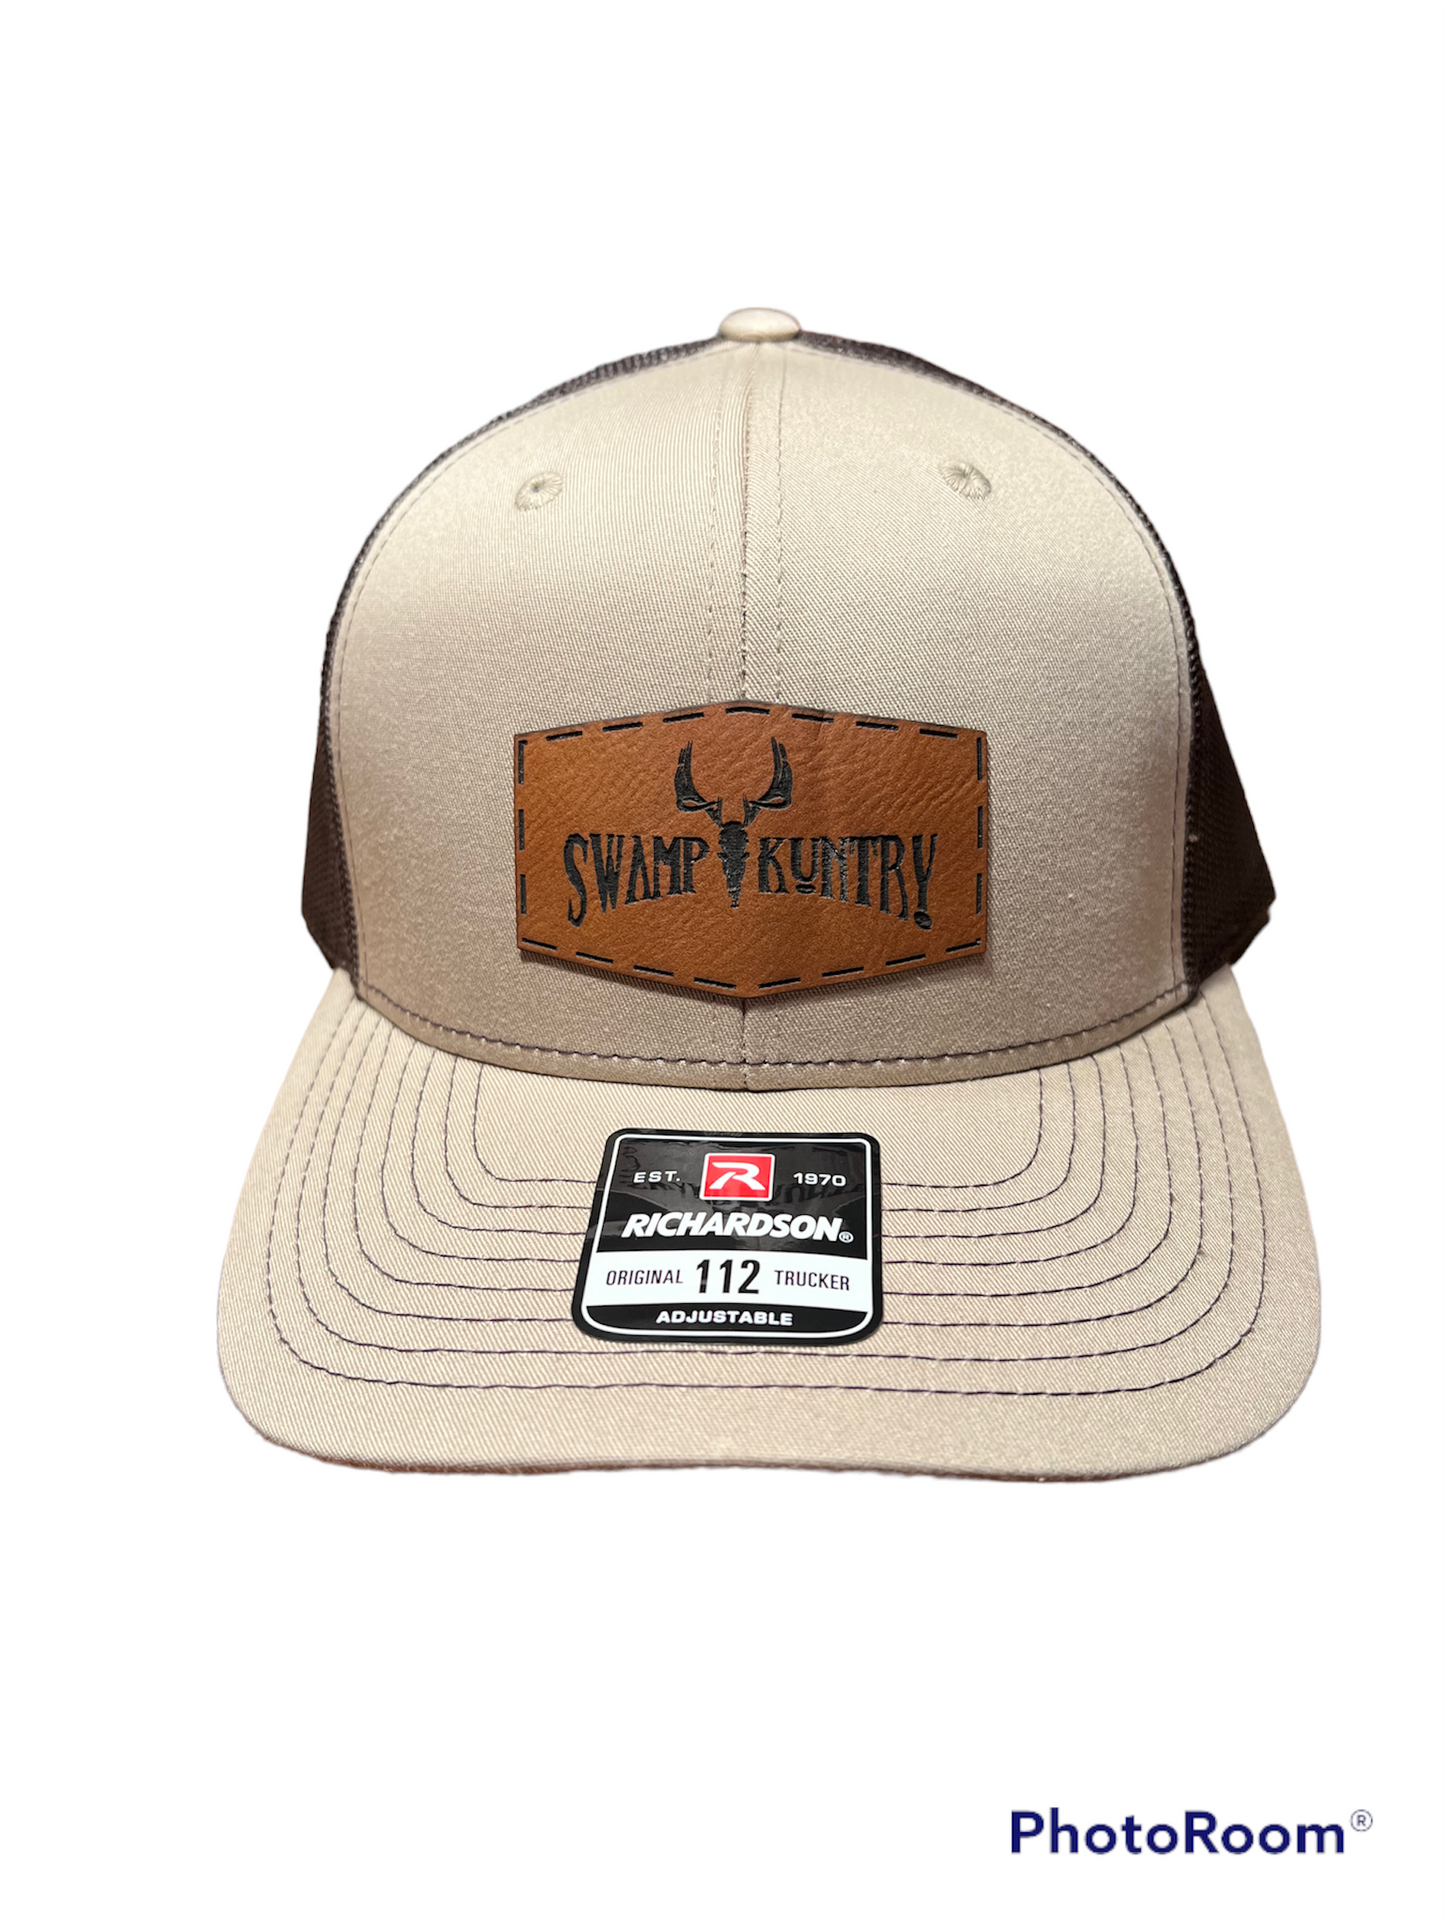 Swamp Kuntry Leather Patch Deer Hat